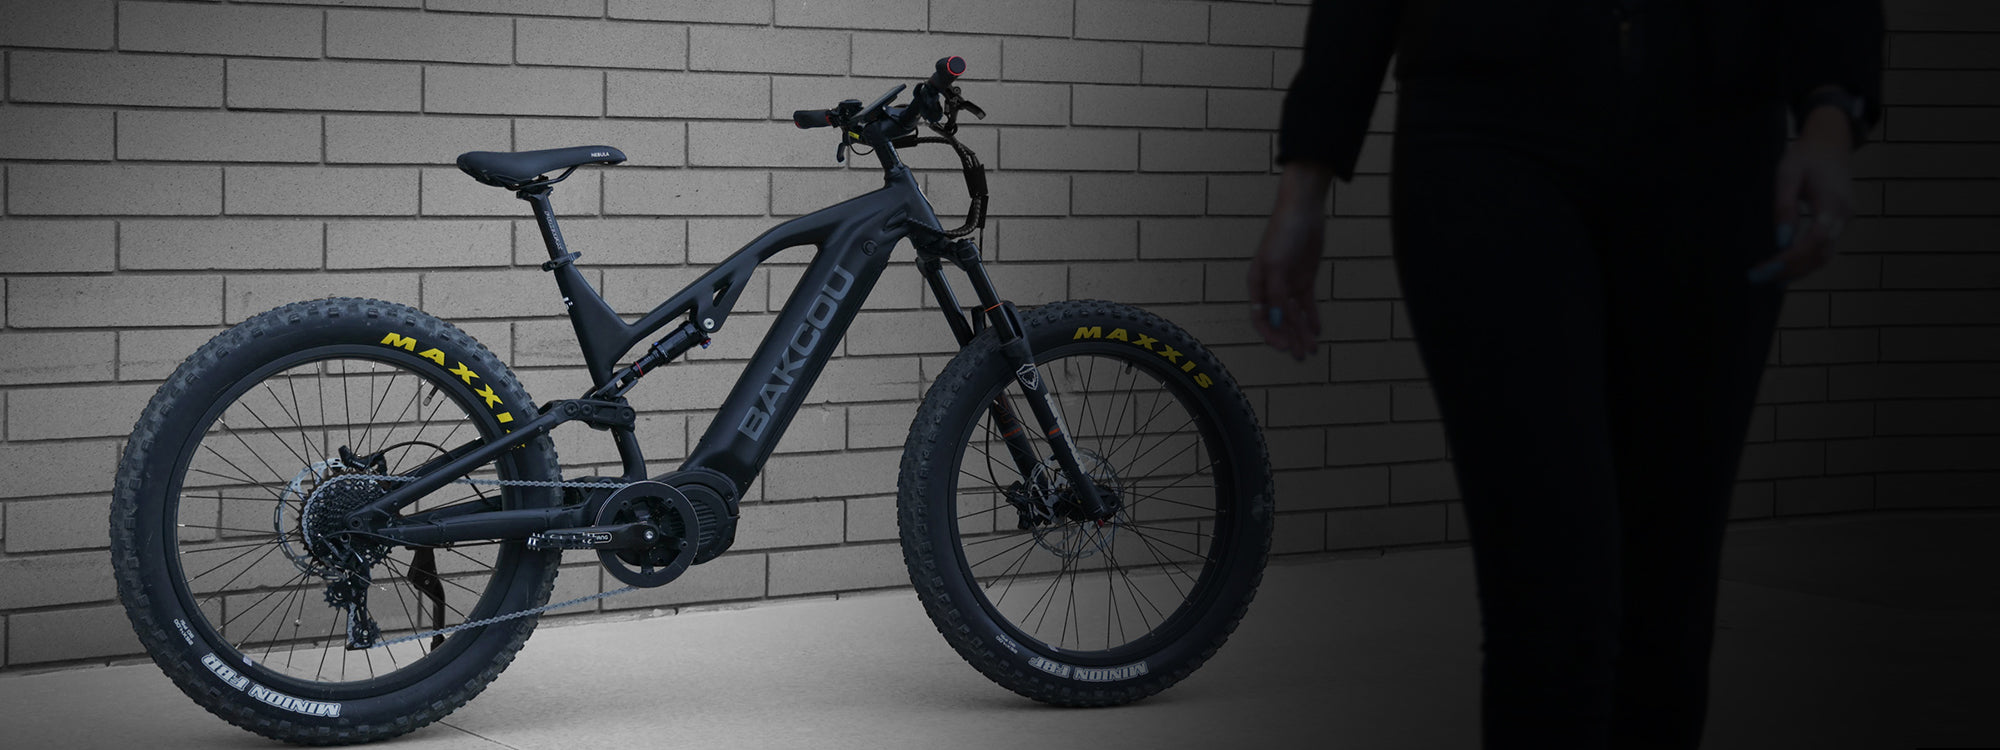 Bakcou Scout full suspension eBike black leaning up against a wall